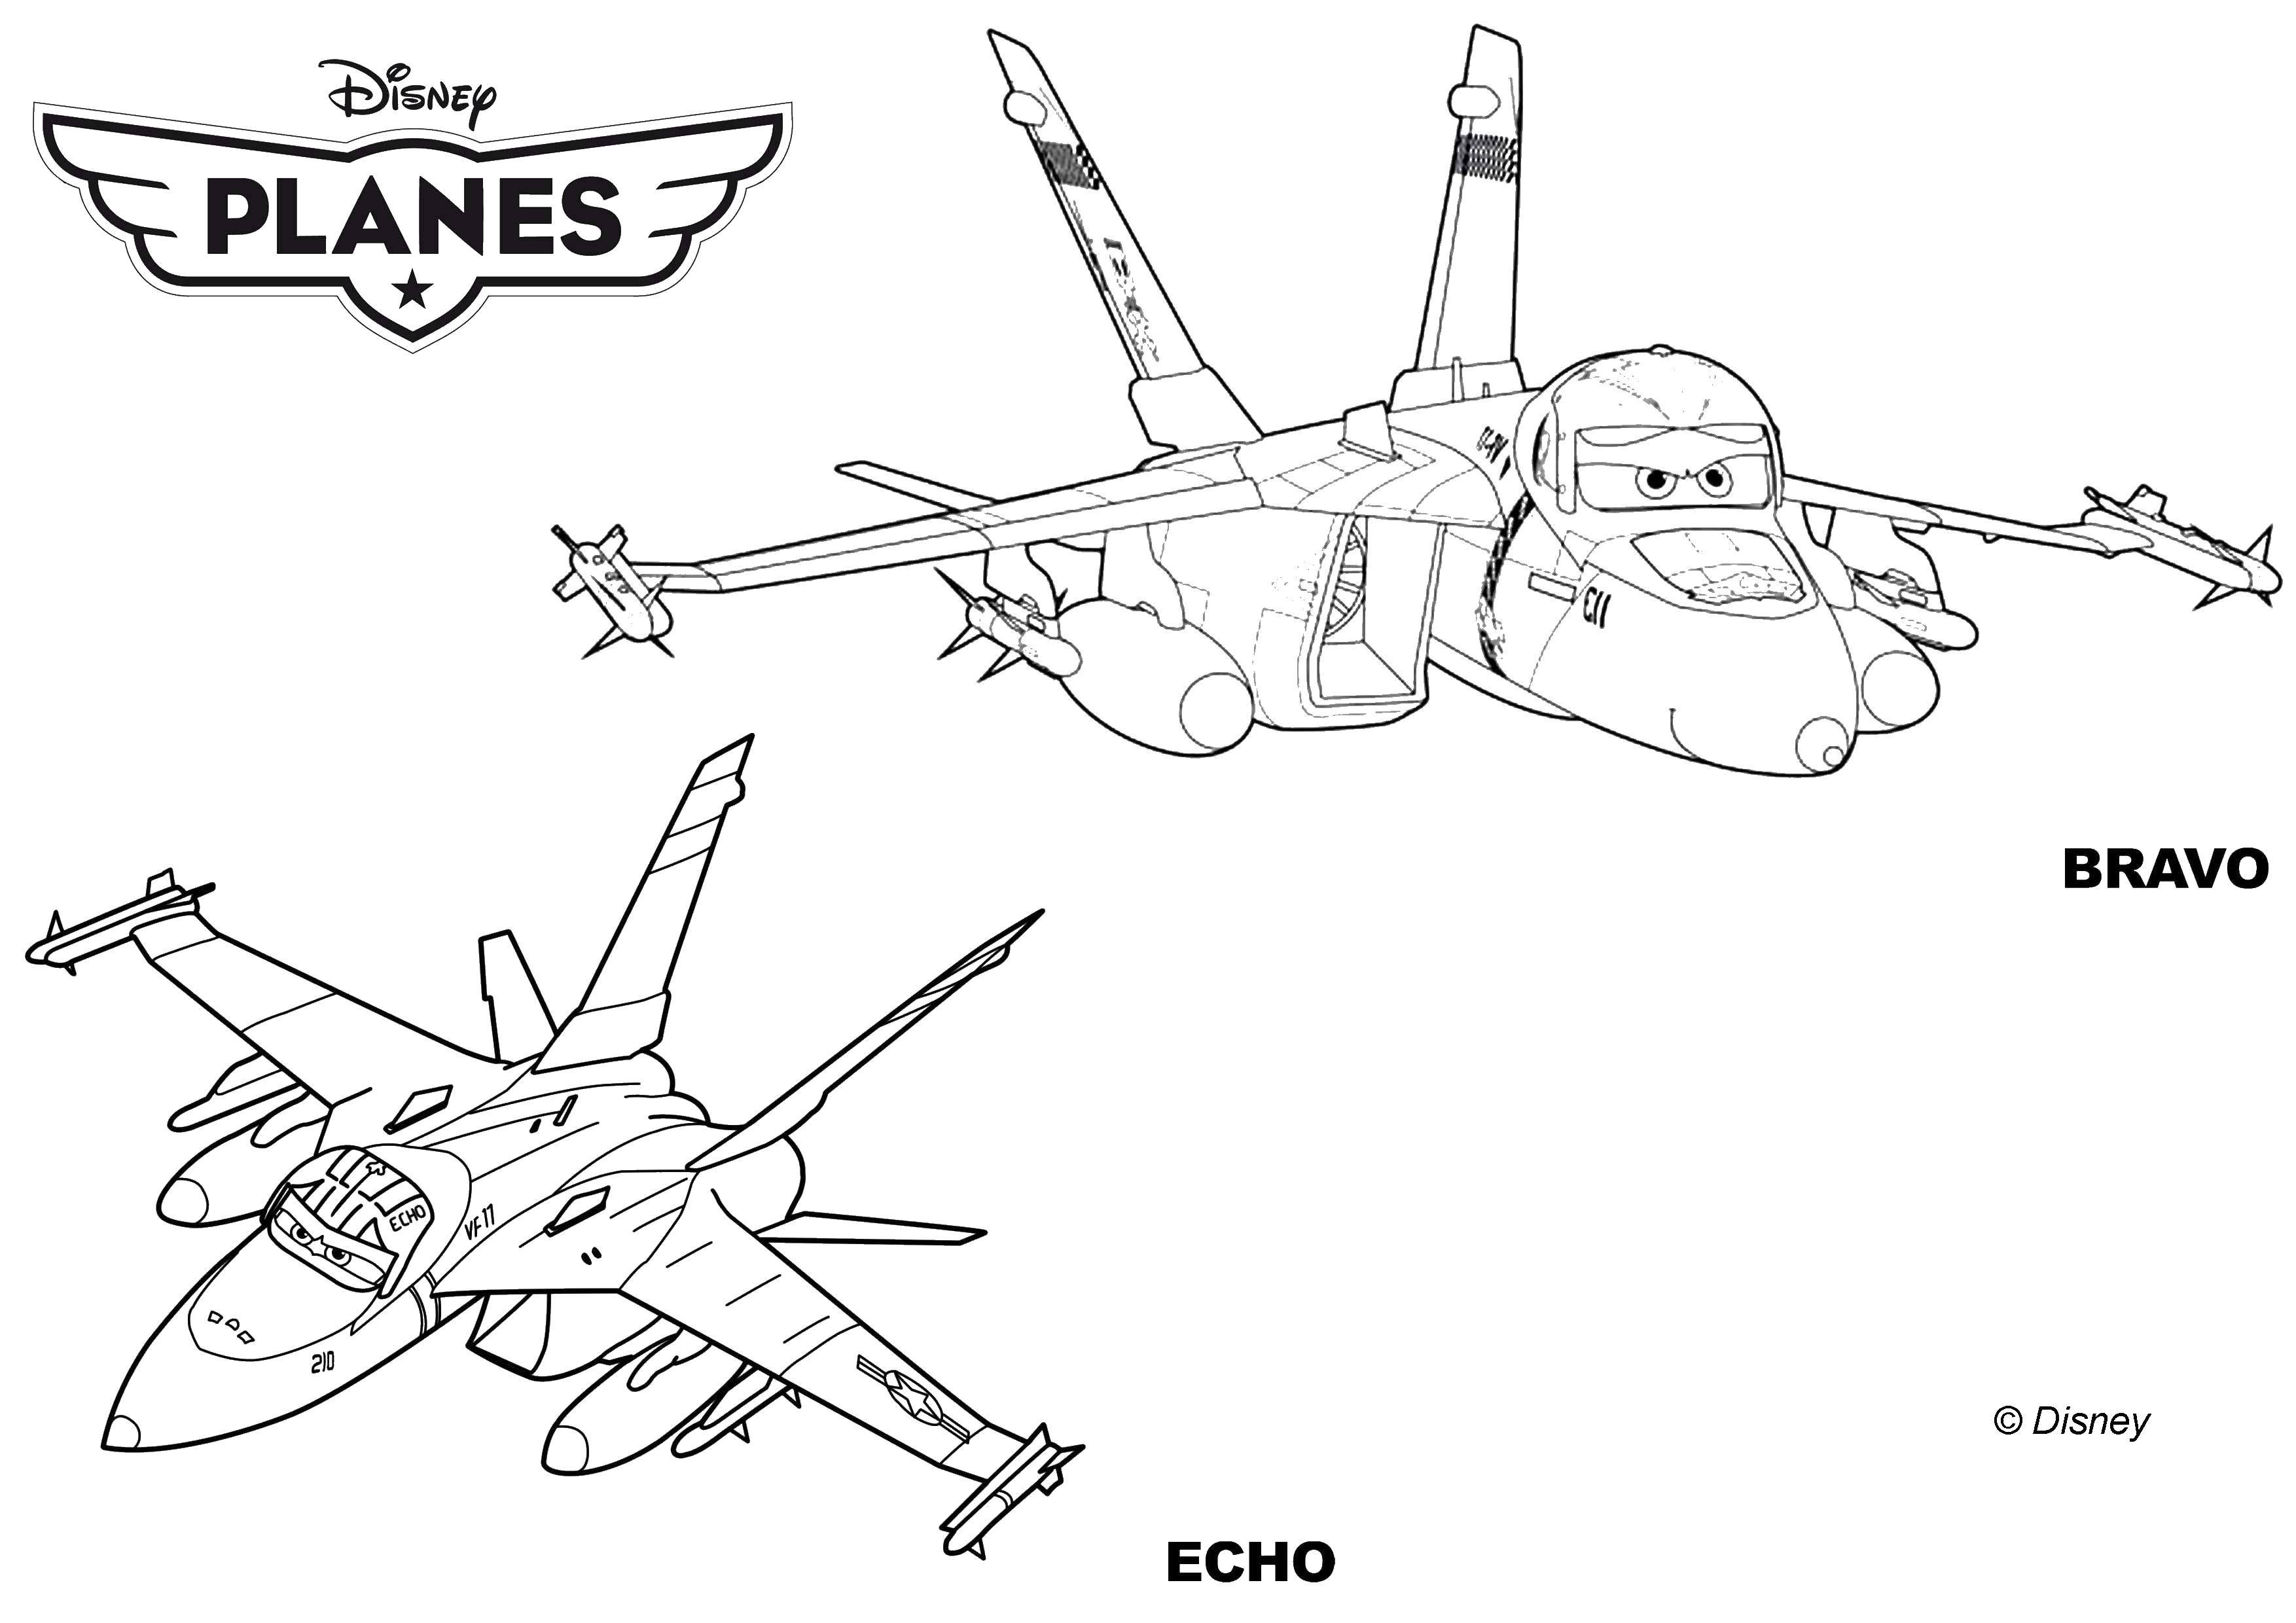 Coloring Aircraft Brava and Exo. Category the planes. Tags:  The Plane, Dusty.